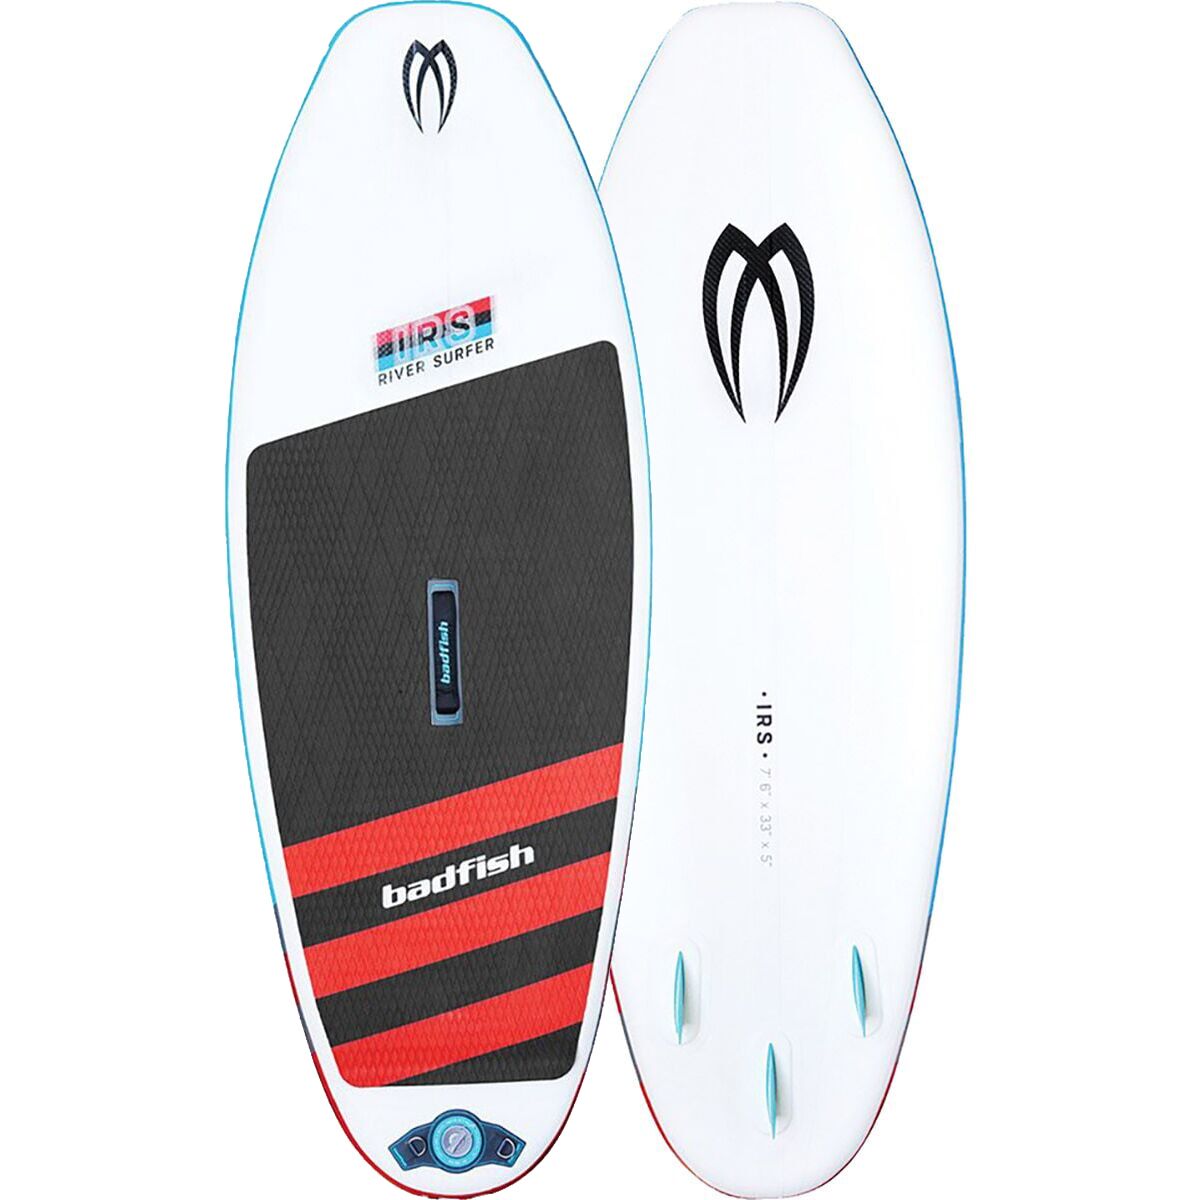 Badfish IRS Inflatable Stand-Up Paddleboard